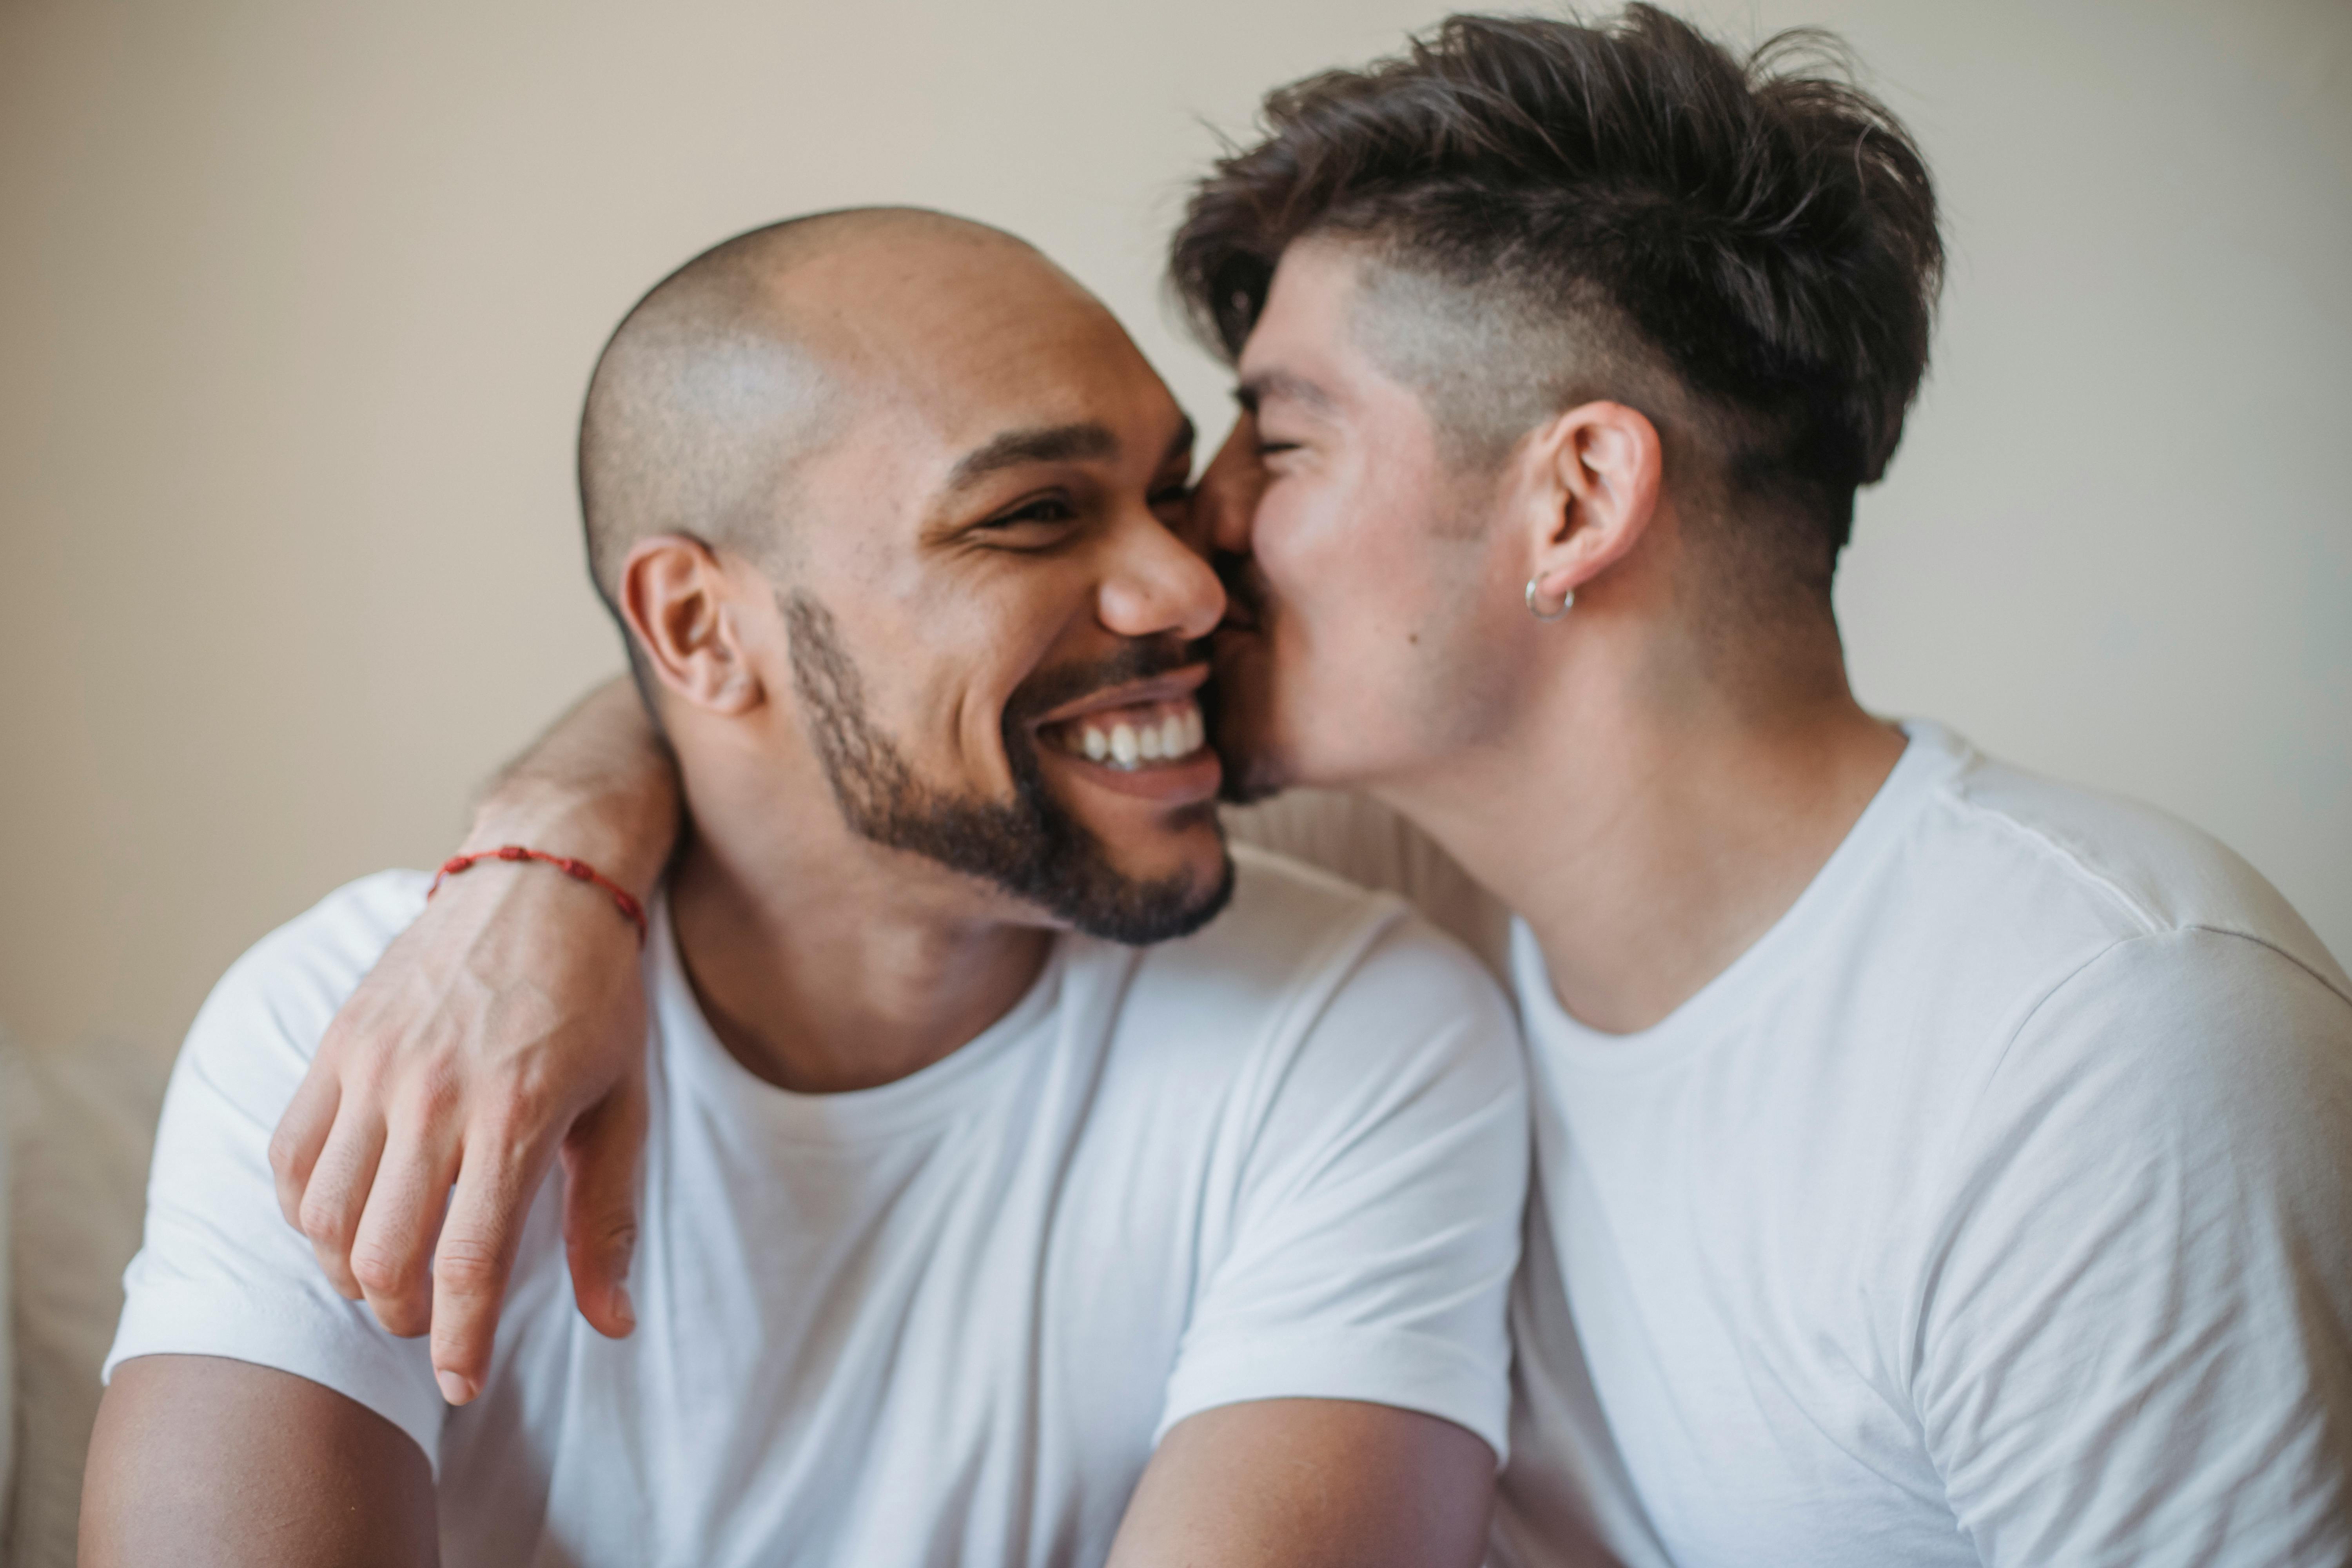 man kissing another man on the cheek